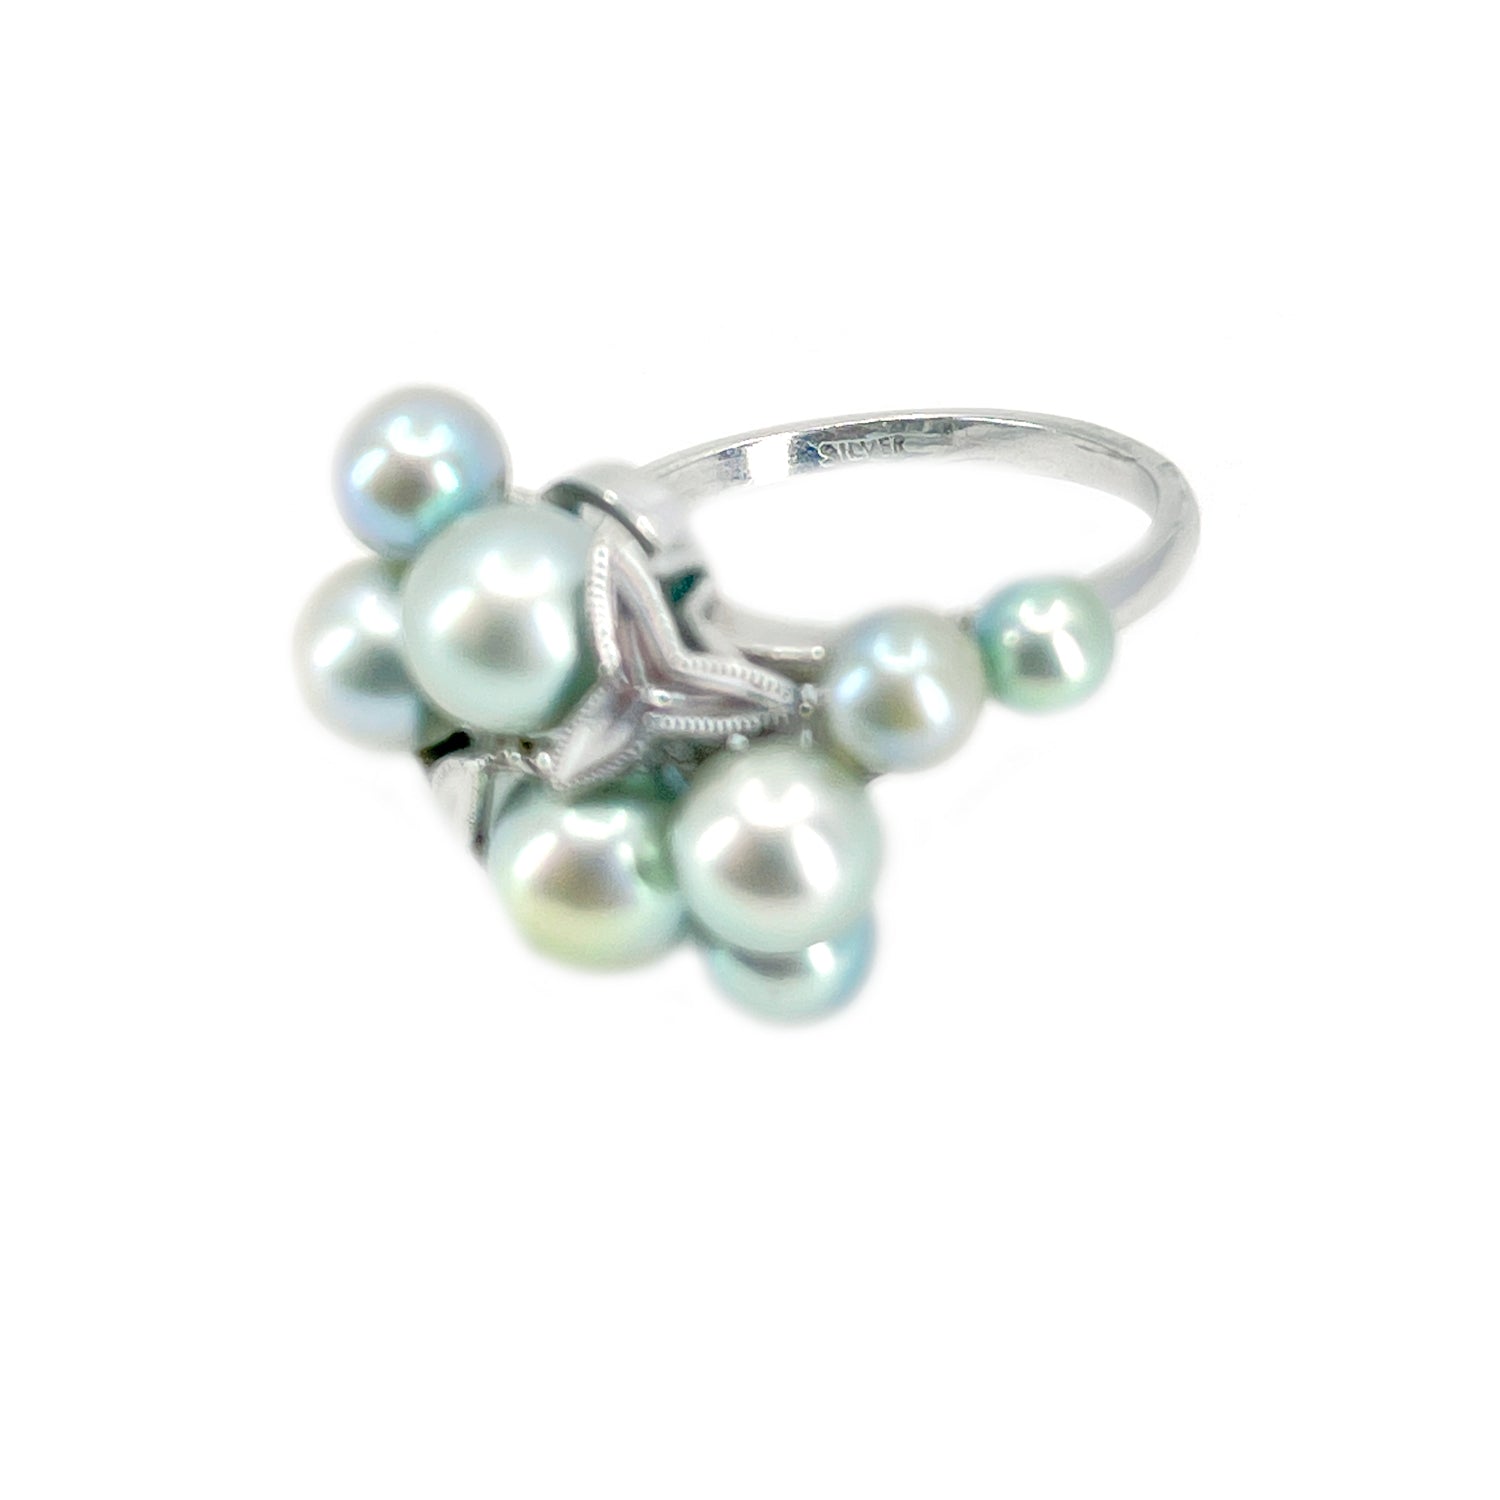 Nouveau Cluster Blue Green Japanese Saltwater Akoya Cultured Pearl Vintage Ring- Sterling Silver Sz 6 3/4